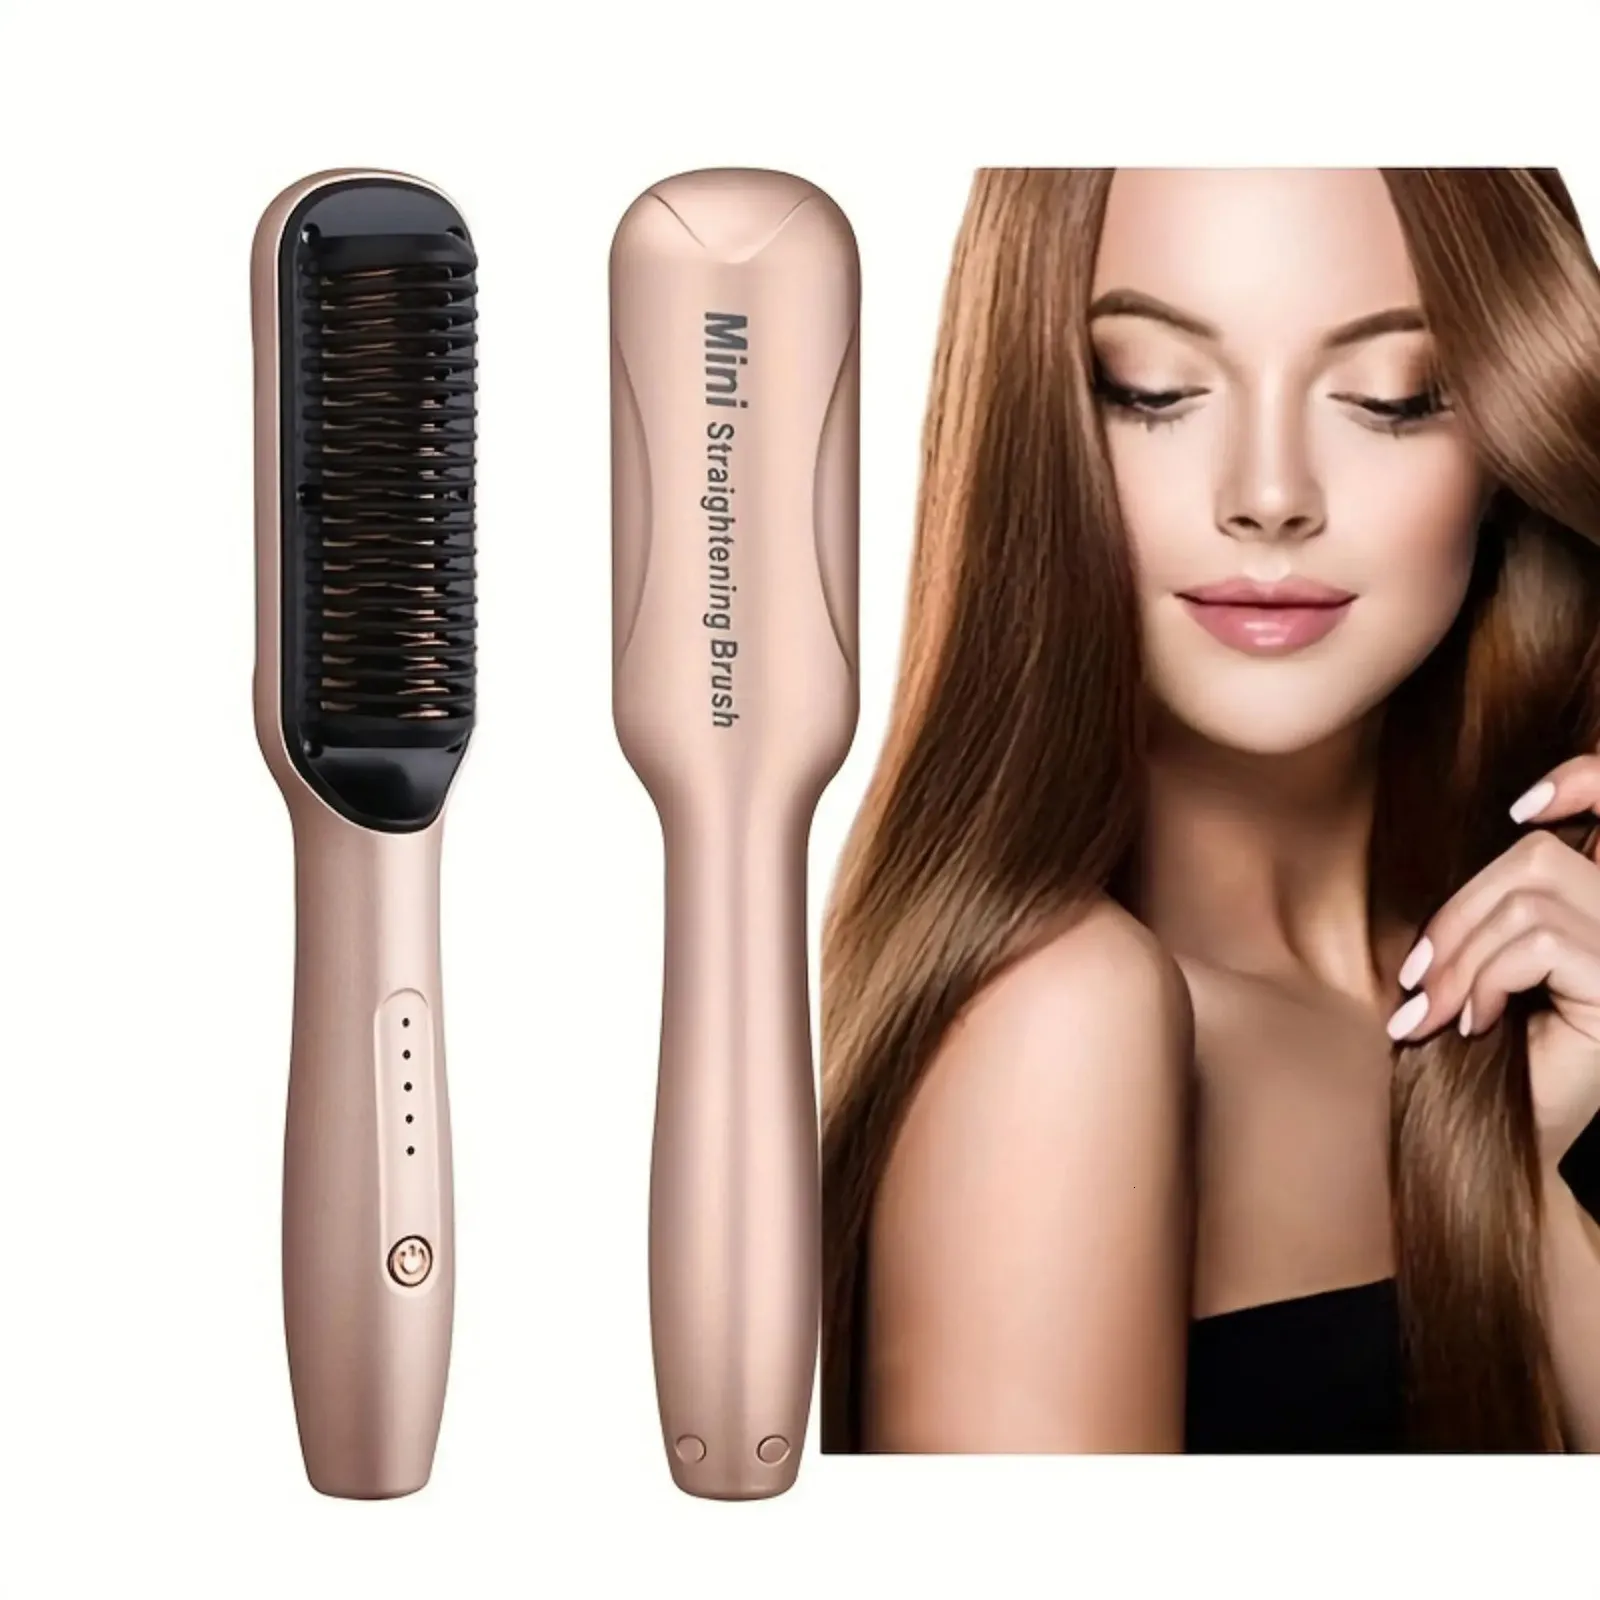 Hair Straighteners Portable Mini Hair Straightener Comb Gentle On Hair Perfect For Straightening Air Bangs And Slightly Curly Hair 231101